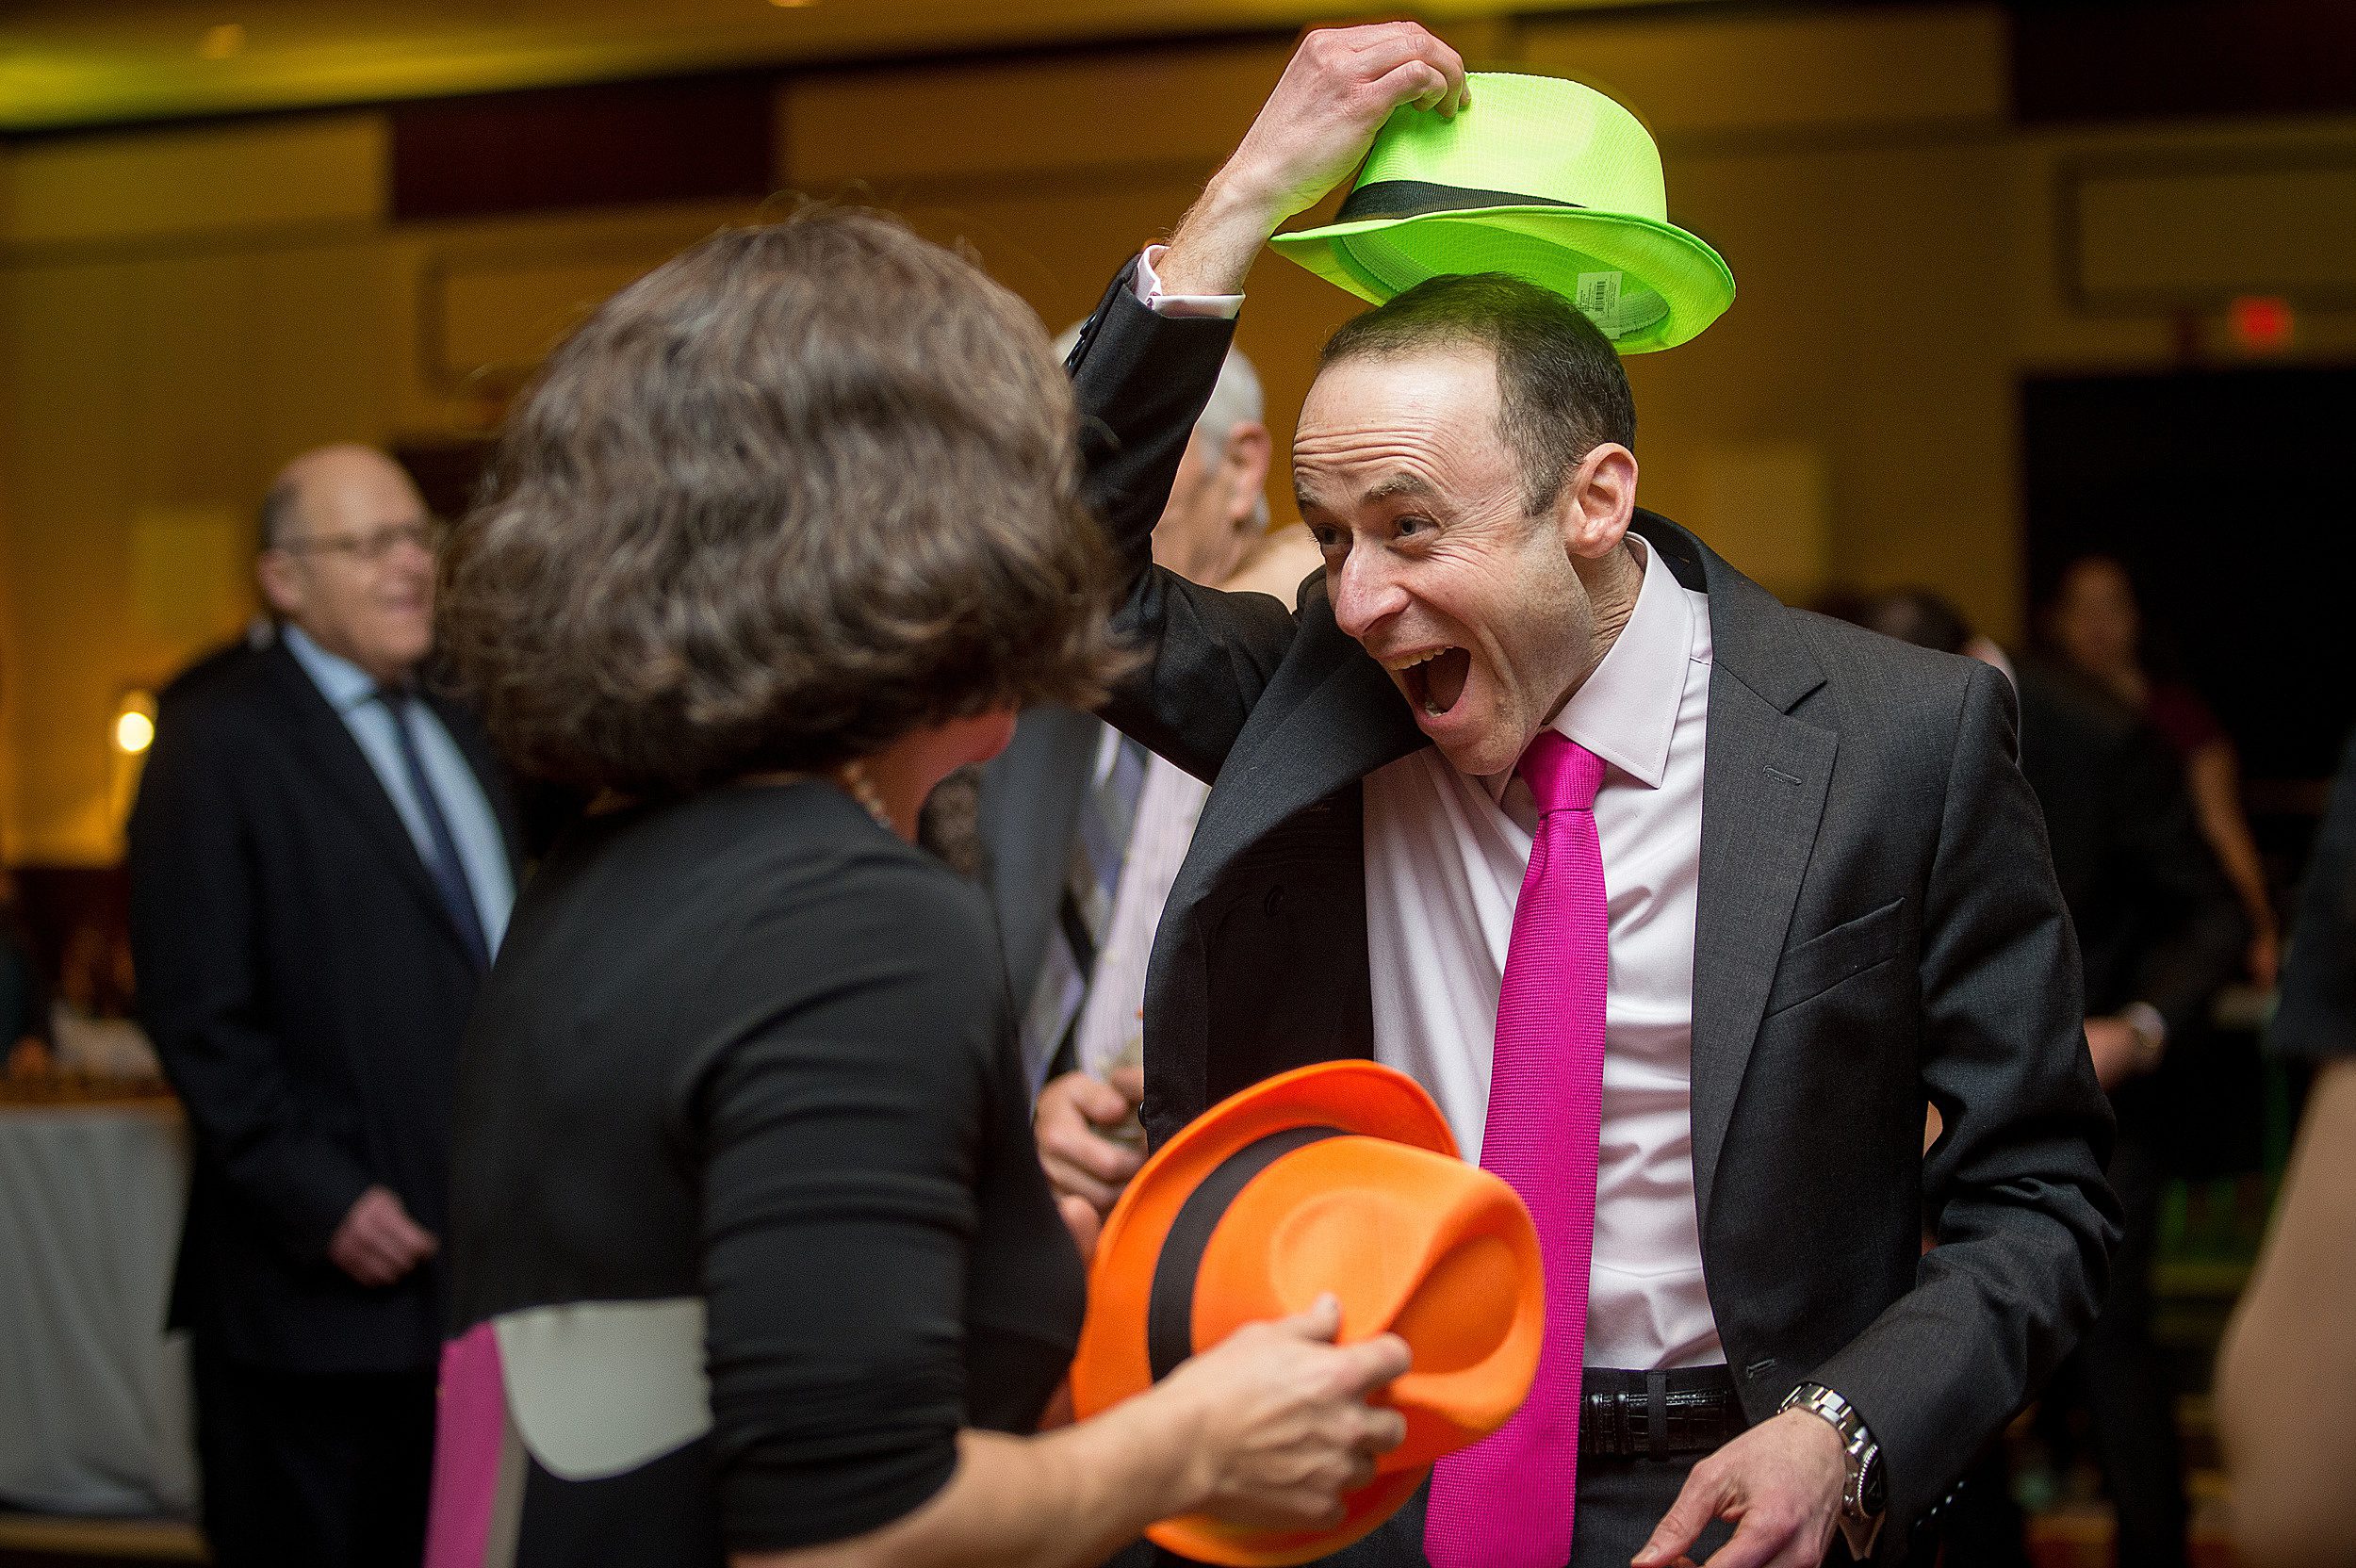 A man celebrates and plays in a black suit and a neon green fedora and pink tie